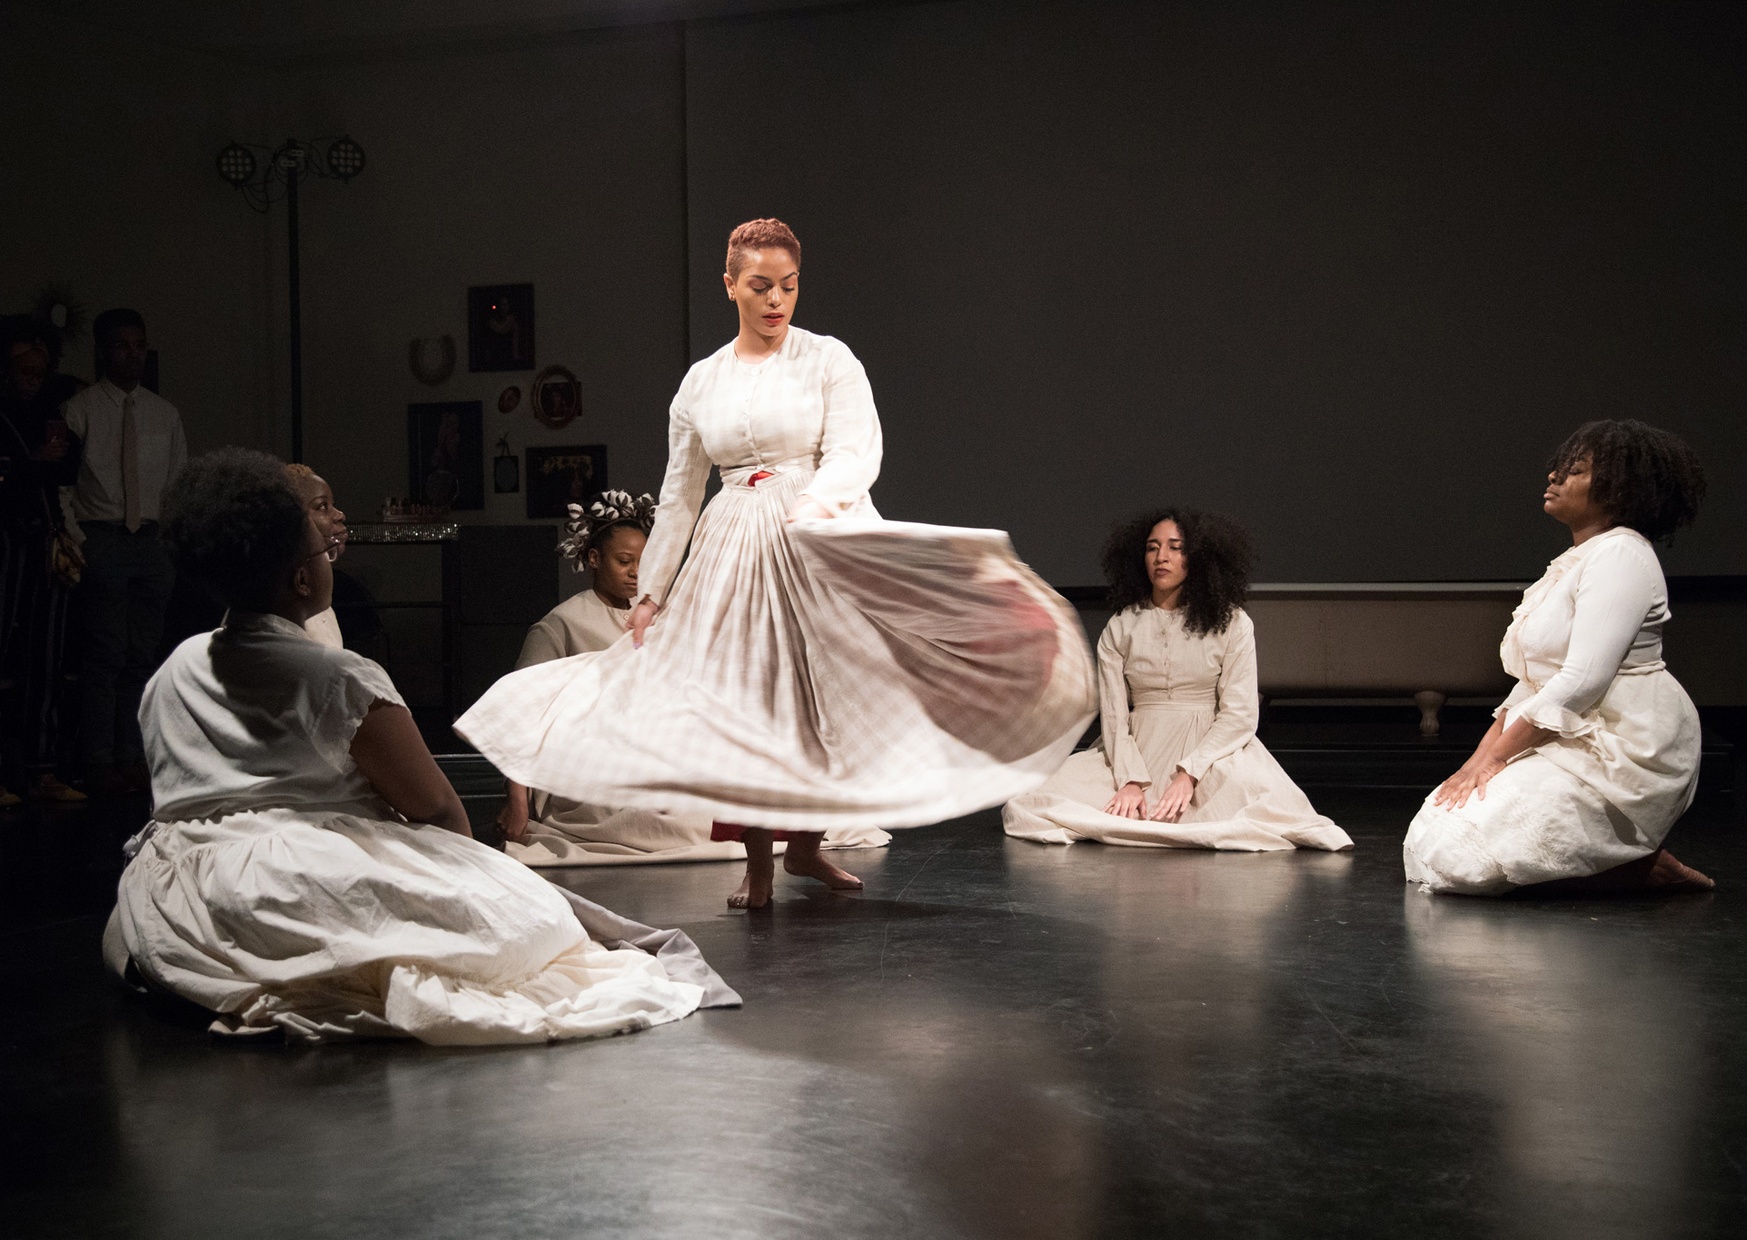 Six women of color are performing in a dark room with a black floor. Five of the women sit on the ground in a circle while one woman stands towards the center and twirls her skirt. They are all wearing white dresses. 